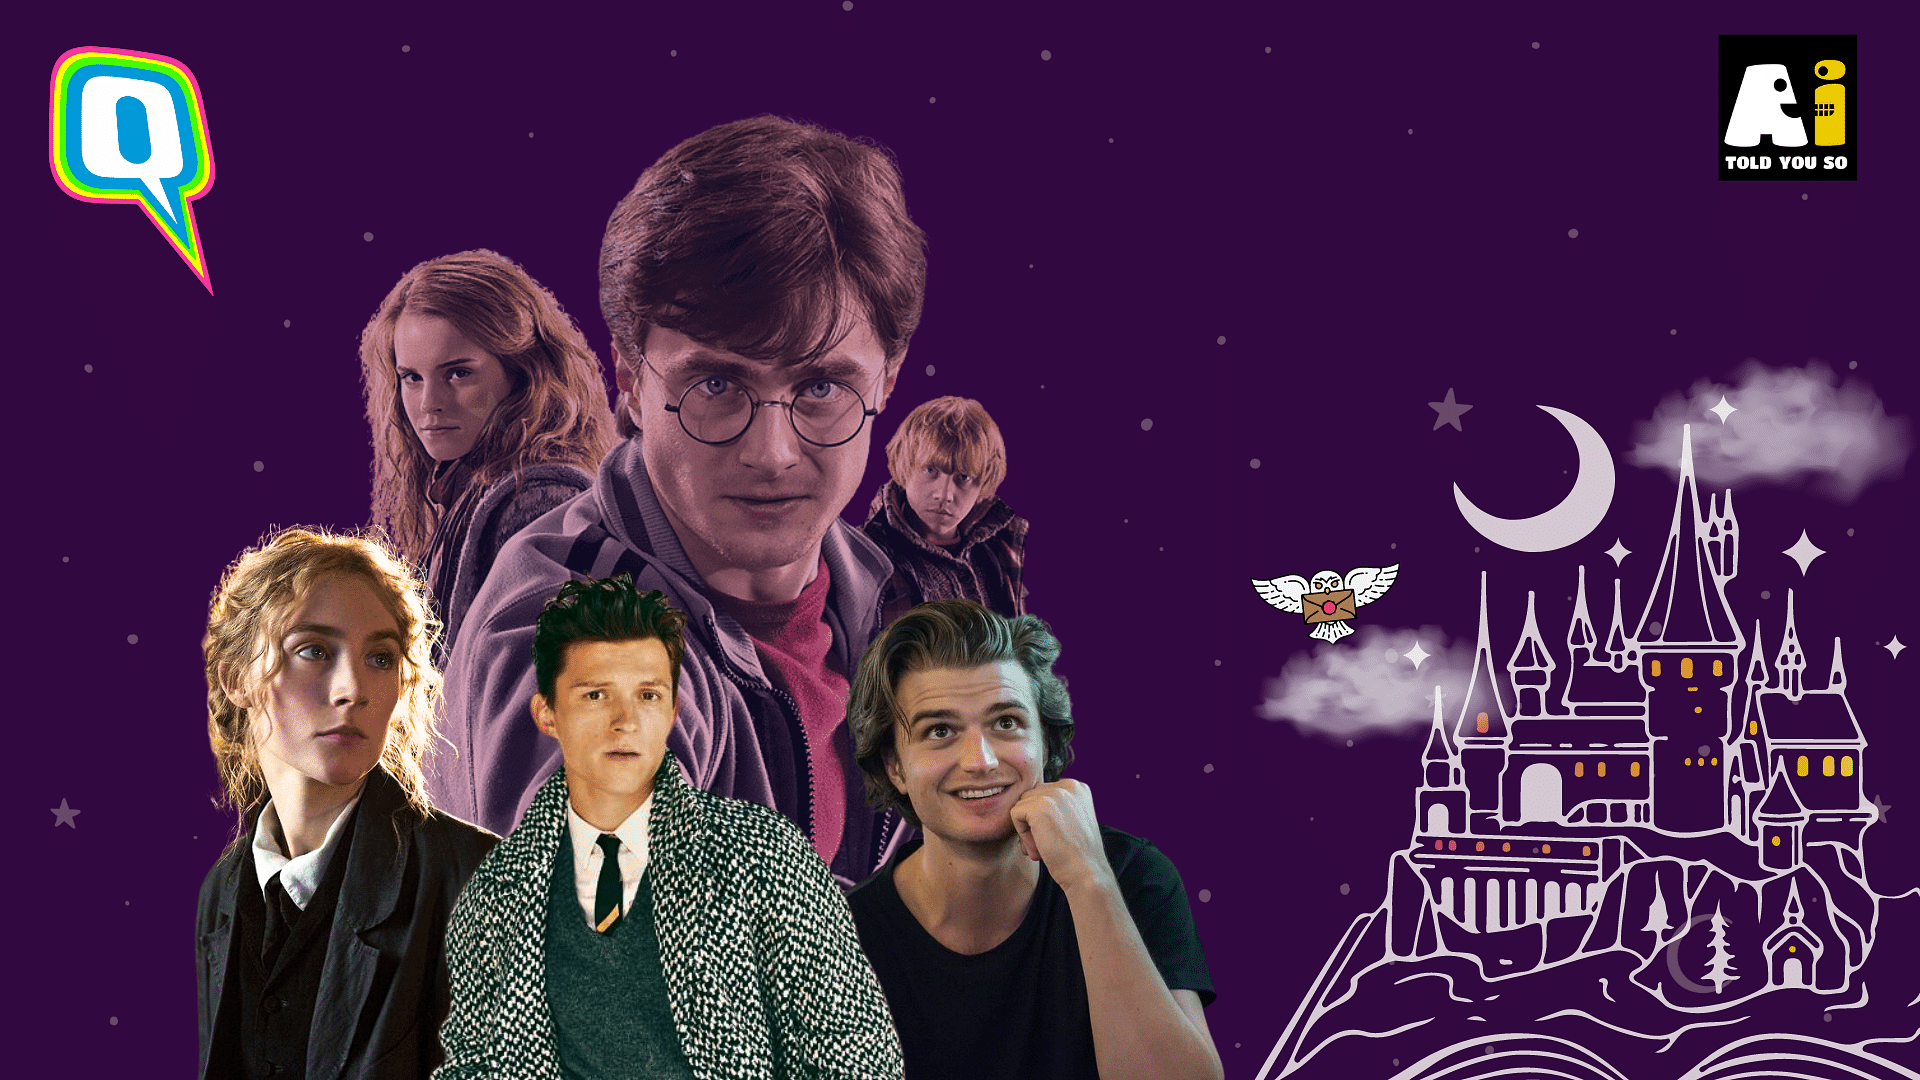 Harry Potter TV Series: All About the HBO Max Show - Parade